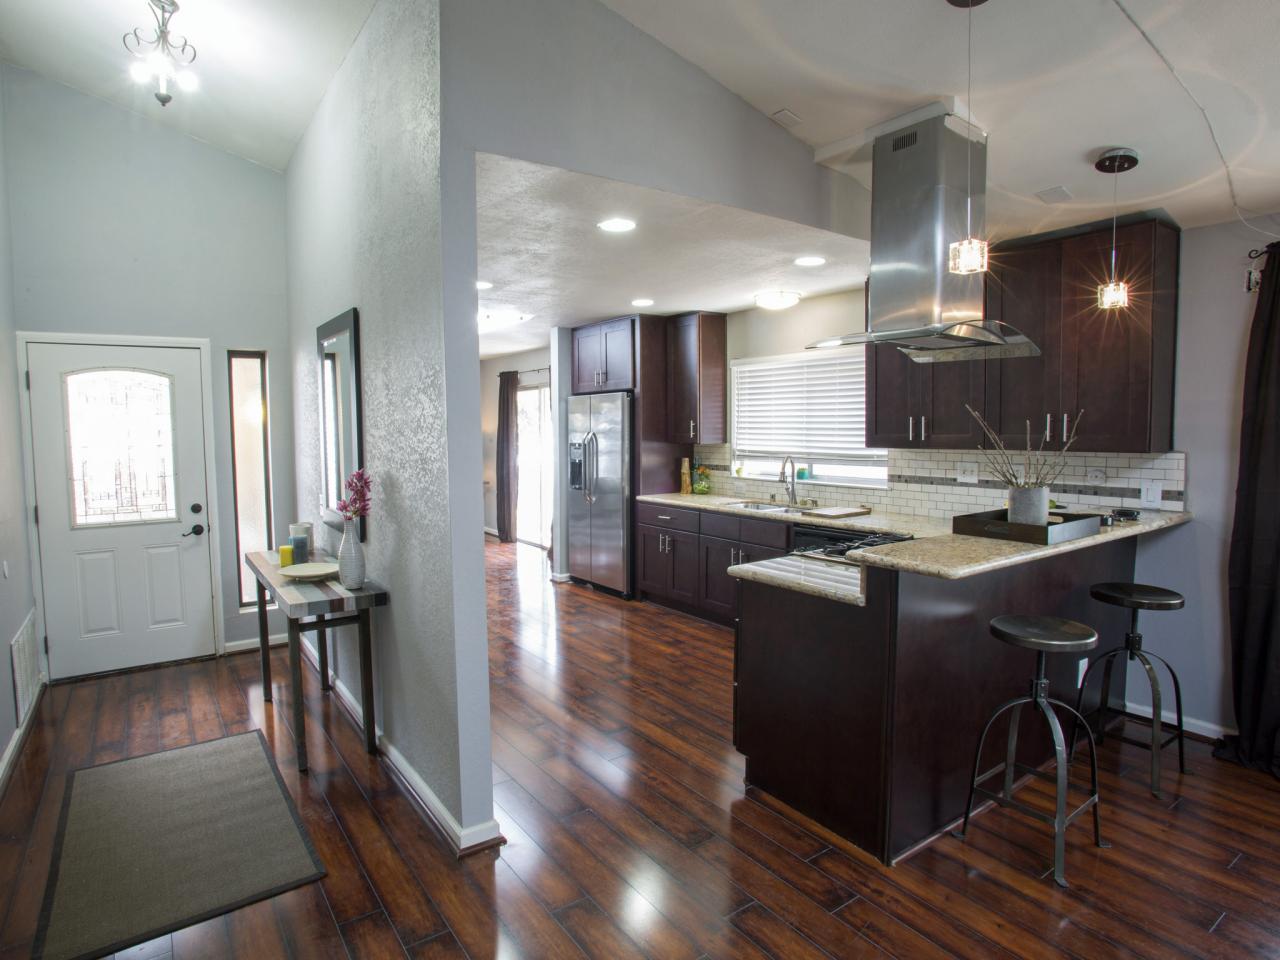 The Pros And Cons Of Laminate Flooring, Is Hardwood Flooring Good For Kitchens